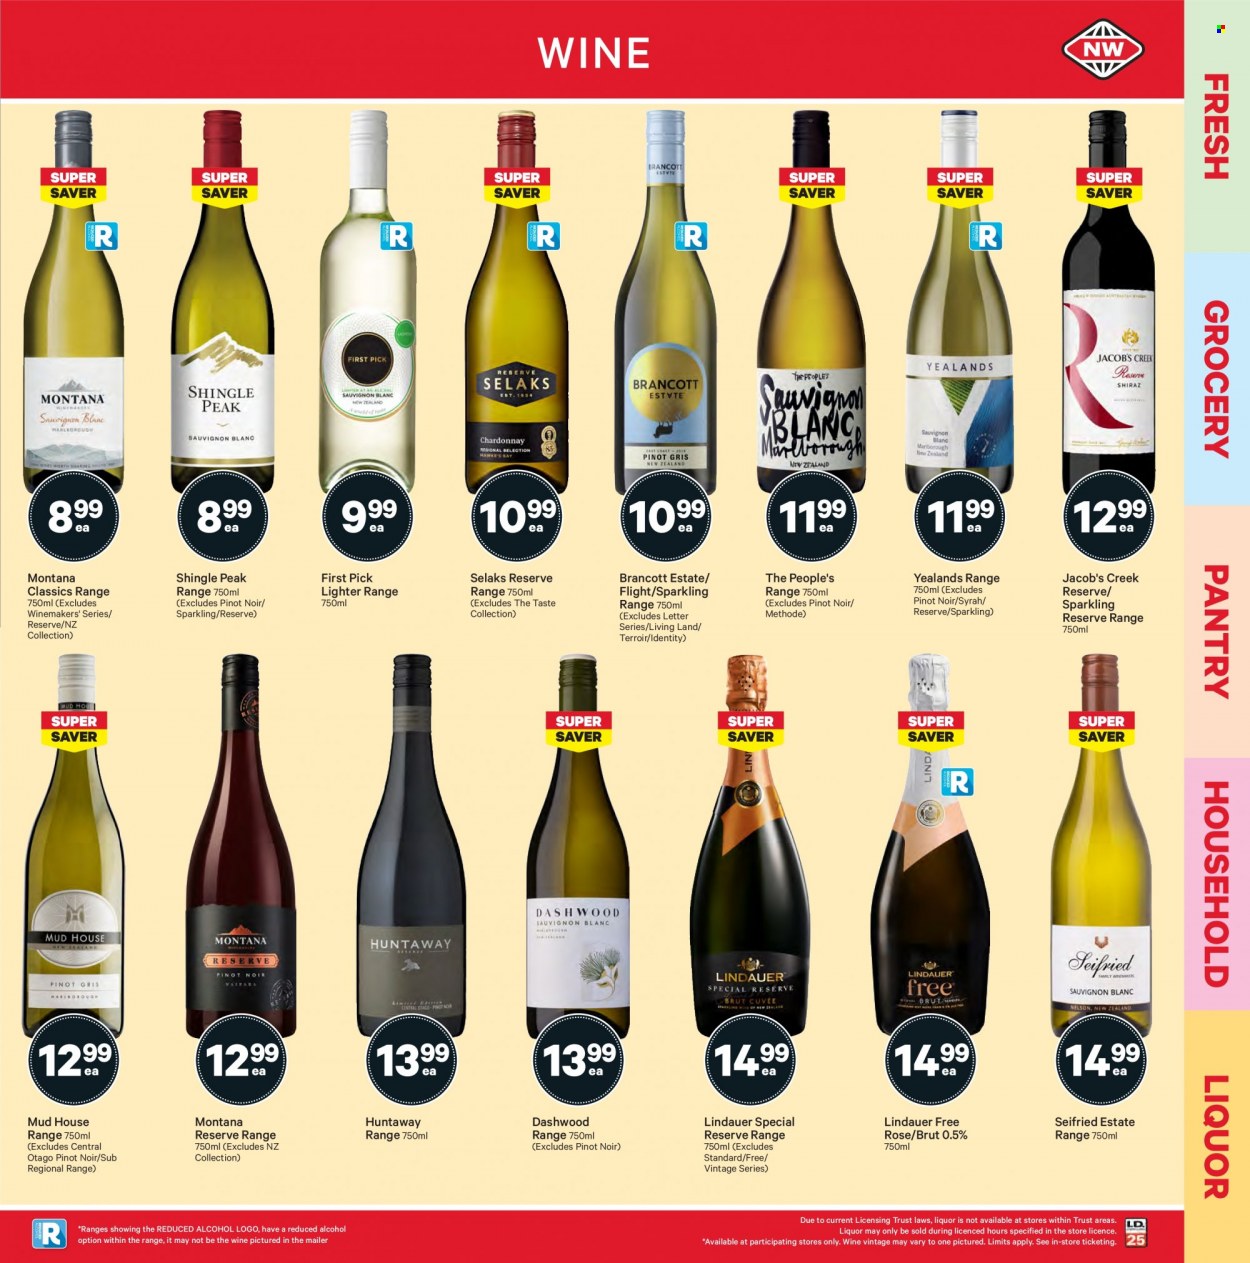 thumbnail - New World mailer - 13.09.2021 - 19.09.2021 - Sales products - Jacobs, red wine, sparkling wine, white wine, wine, Pinot Noir, Lindauer, alcohol, Syrah, Jacob's Creek, Pinot Grigio, Sauvignon Blanc, rosé wine, Brut, Trust. Page 27.